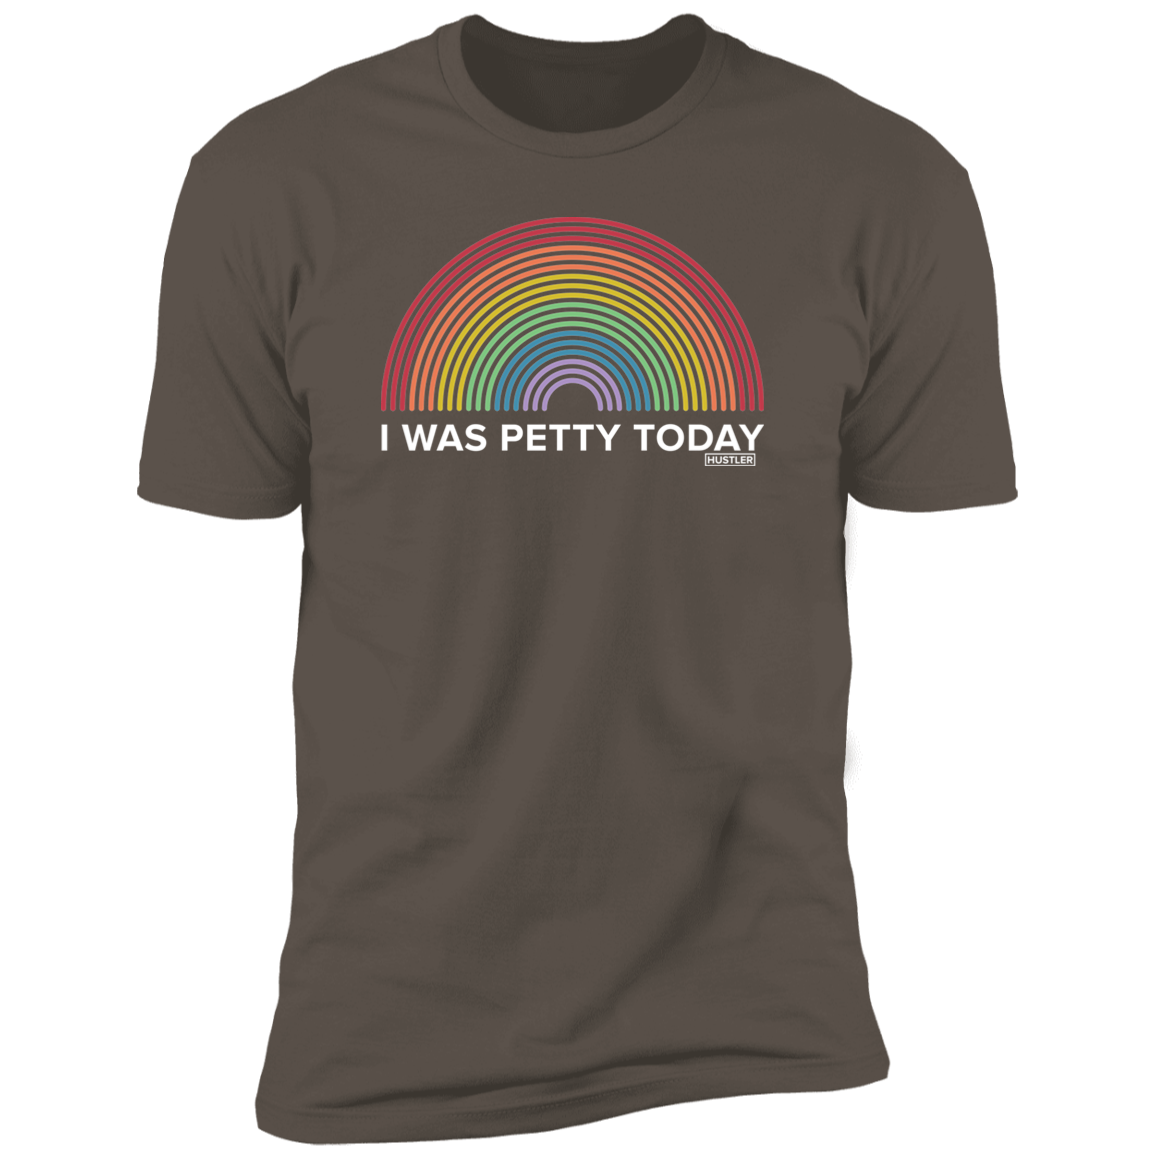 I Was Petty Today Hoodie